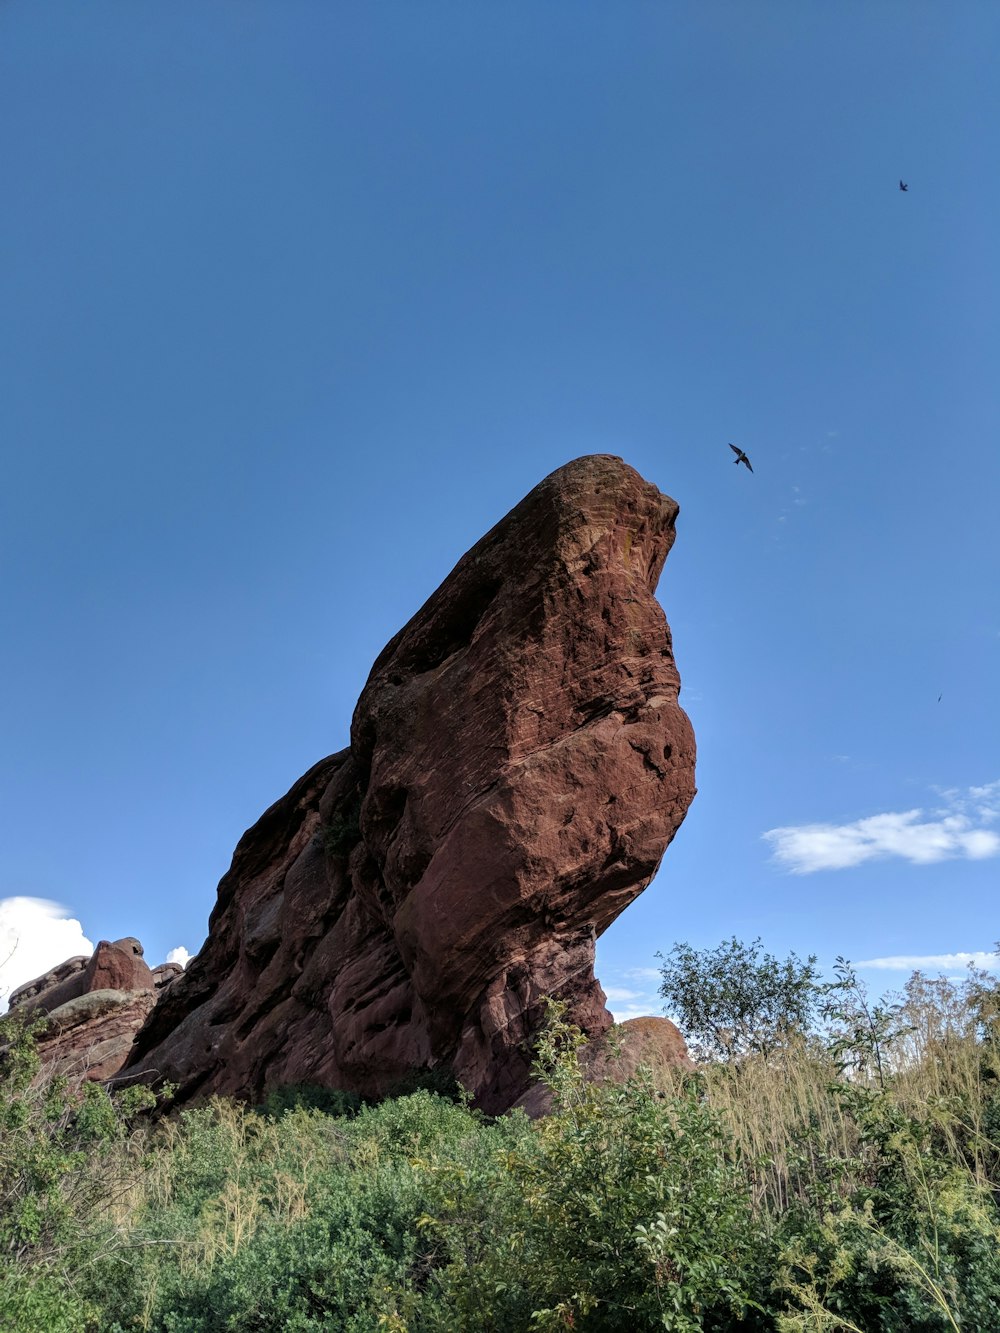 a bird flying over a large rock formation